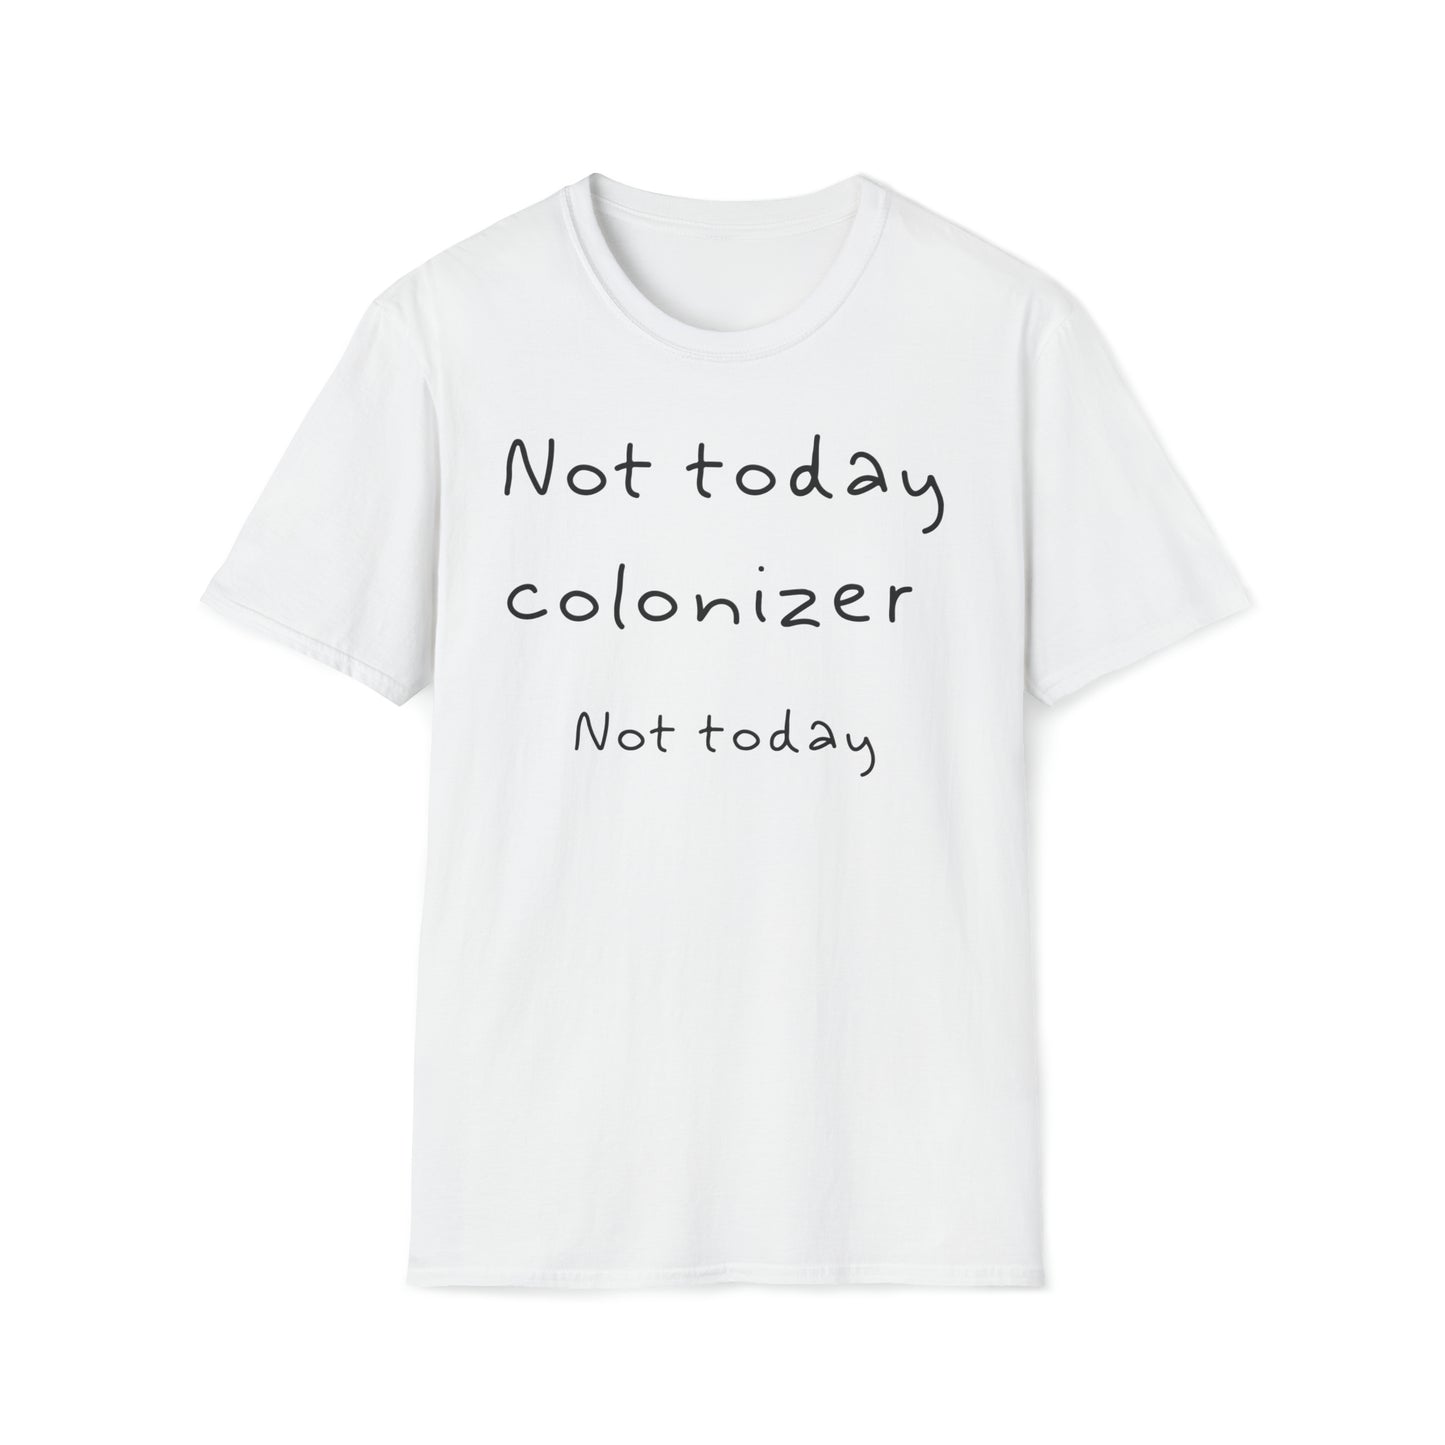 Not Today colonizer, Not Today // T-Shirt